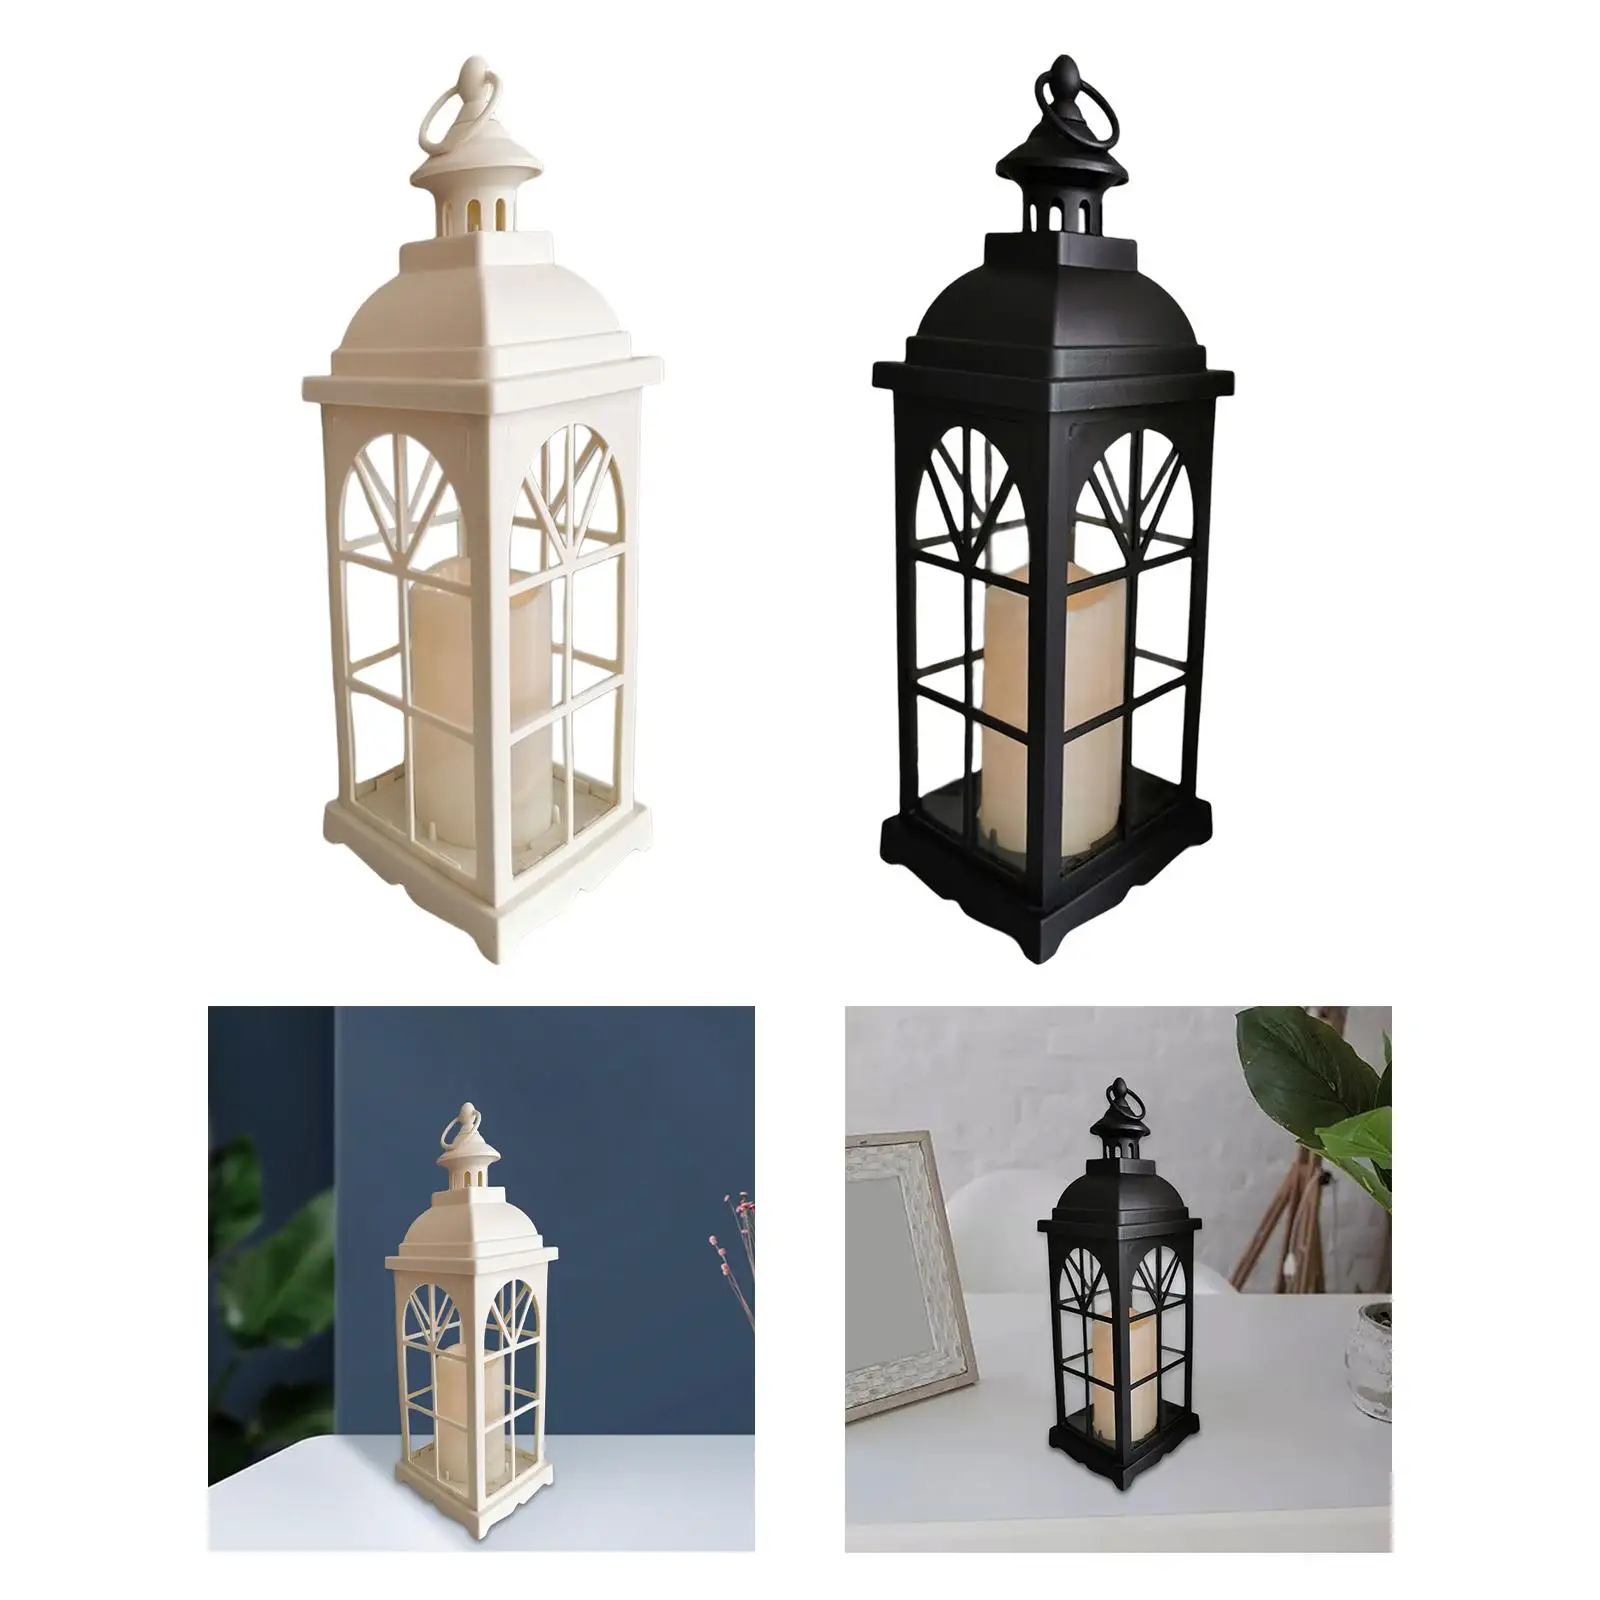 European Style Candle Lantern Candle Holder Farmhouse Lantern Wind Lamp Candlestick for Party Living Room Garden Decor